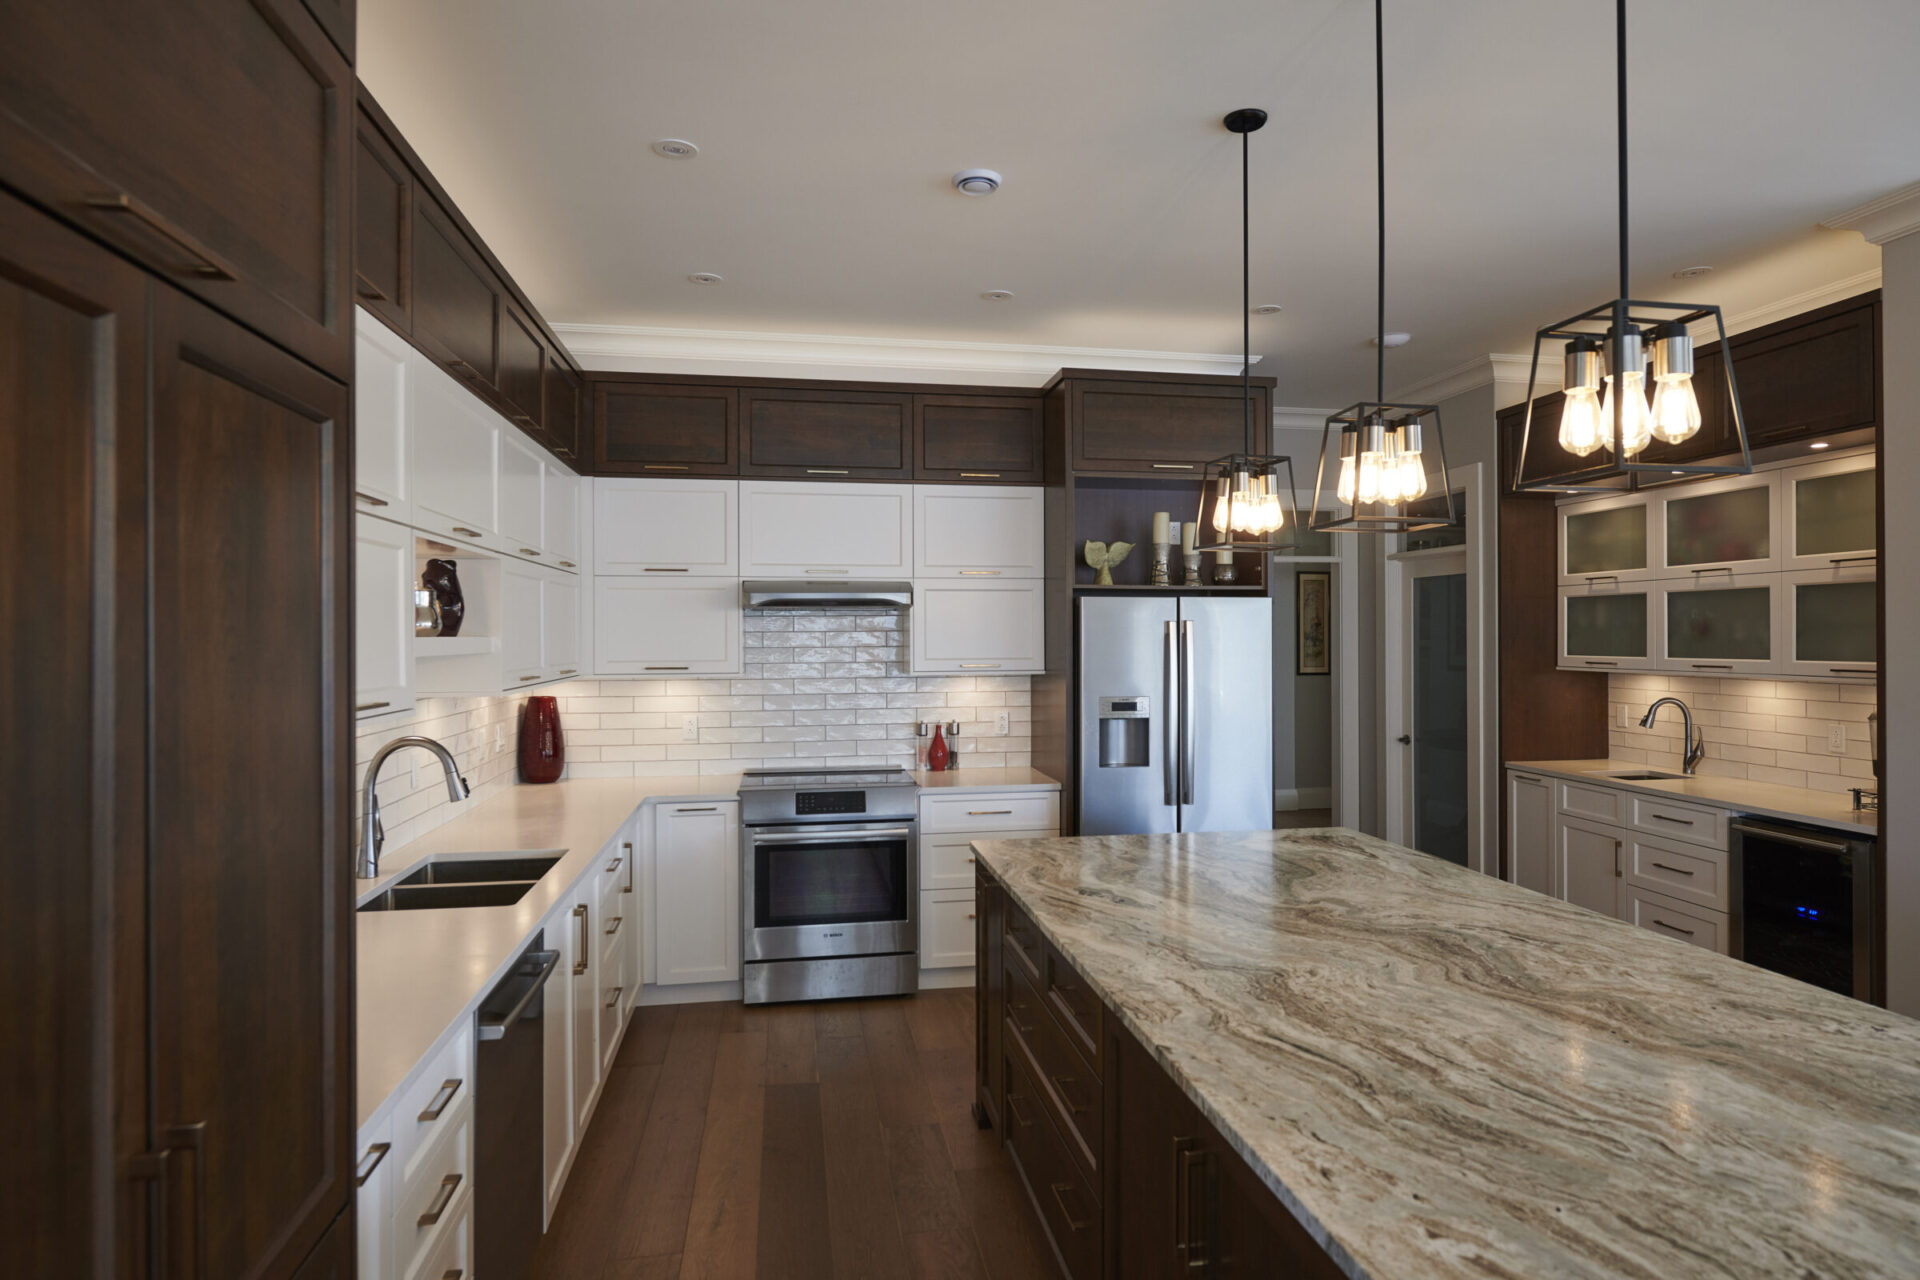 Modern kitchen interior with white cabinetry, dark wood accents, stainless steel appliances, marble countertops, and elegant pendant lighting. Clean and spacious design.